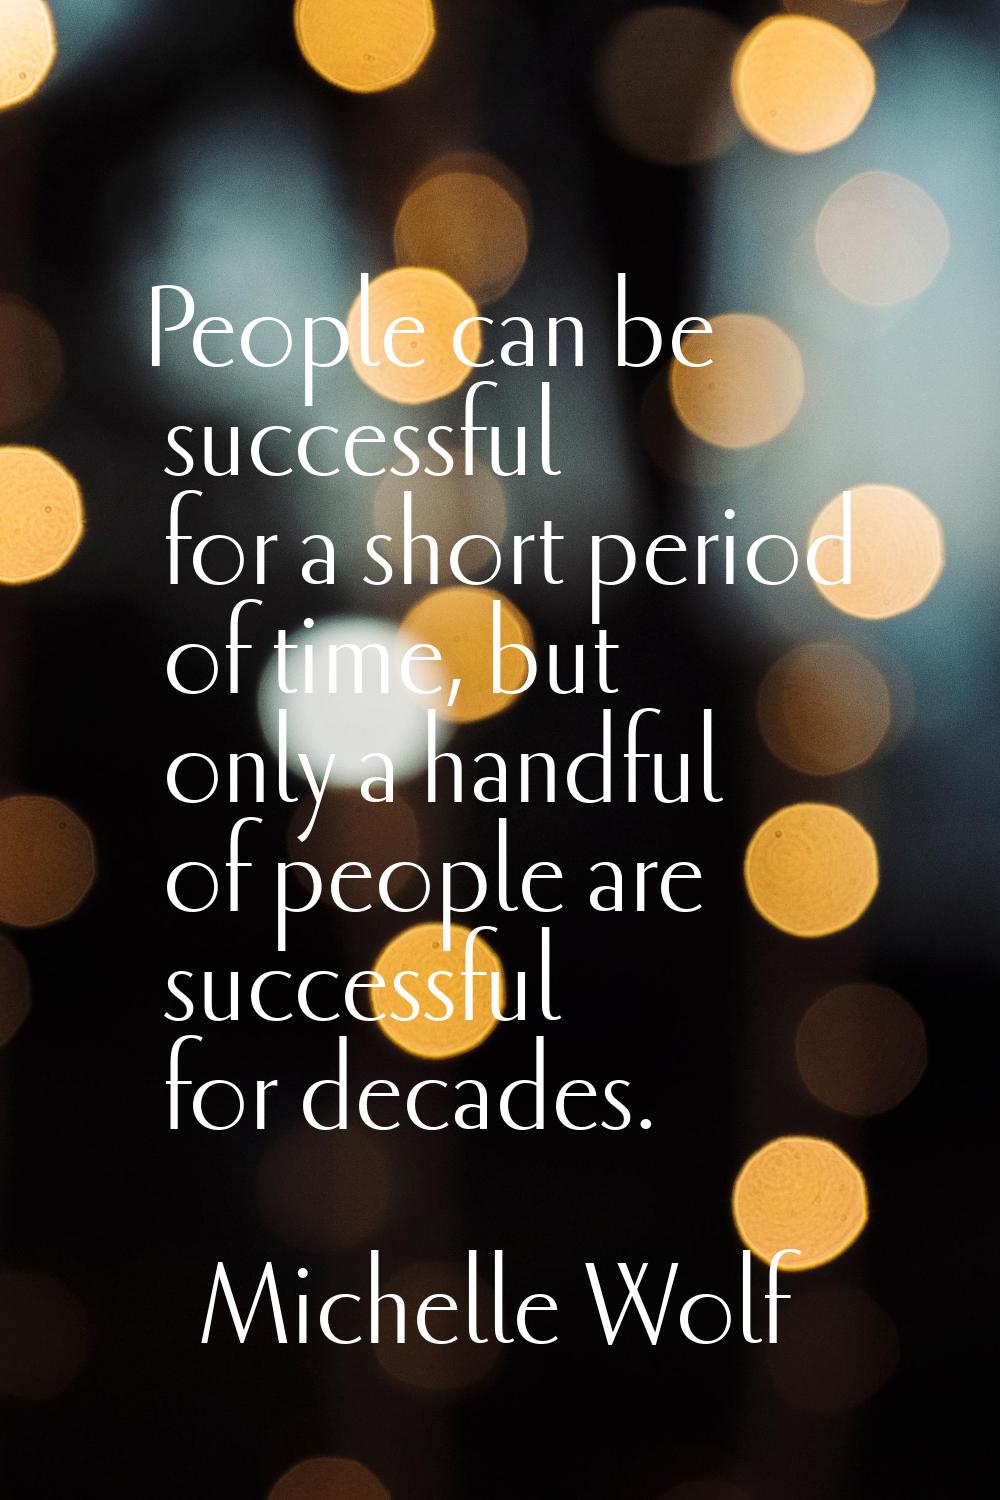 People can be successful for a short period of time, but only a handful of people are successful fo